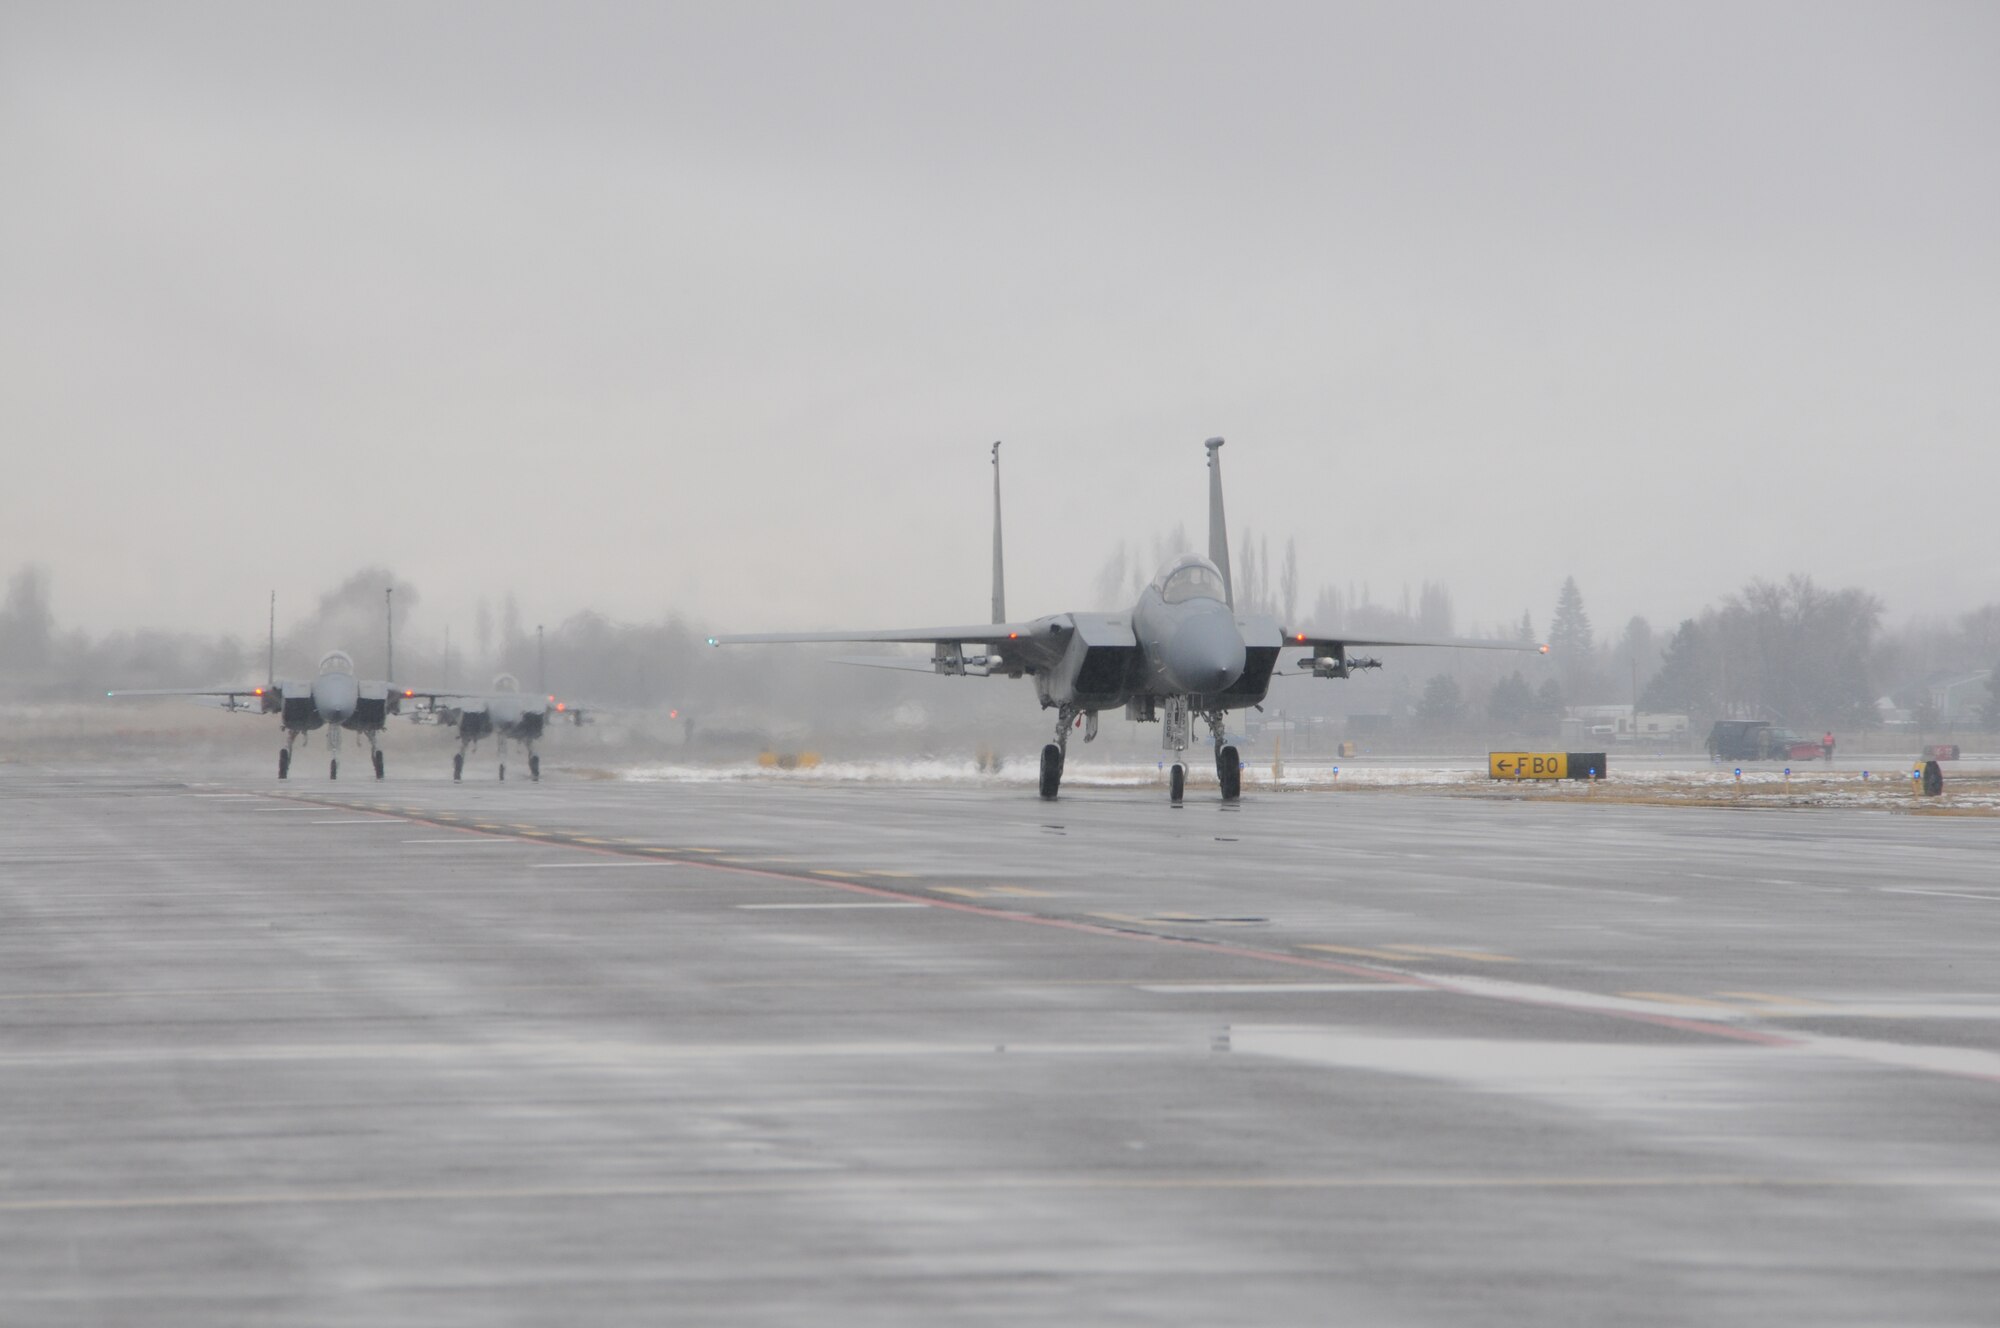 Three Ore. Air National Guard F-15 Eagles from the 173rd Fighter Wing taxi down the snowy flightline at Kingsley Field, Klamath Falls, Ore. February 2, 2010. The completion of this routine training mission marked 100,000 hours flown by the 114th Squadron since its inception in 1983, a truly significant milestone. (U.S. Air Force photo by Tech. Sgt. Jennifer Shirar, Released)  